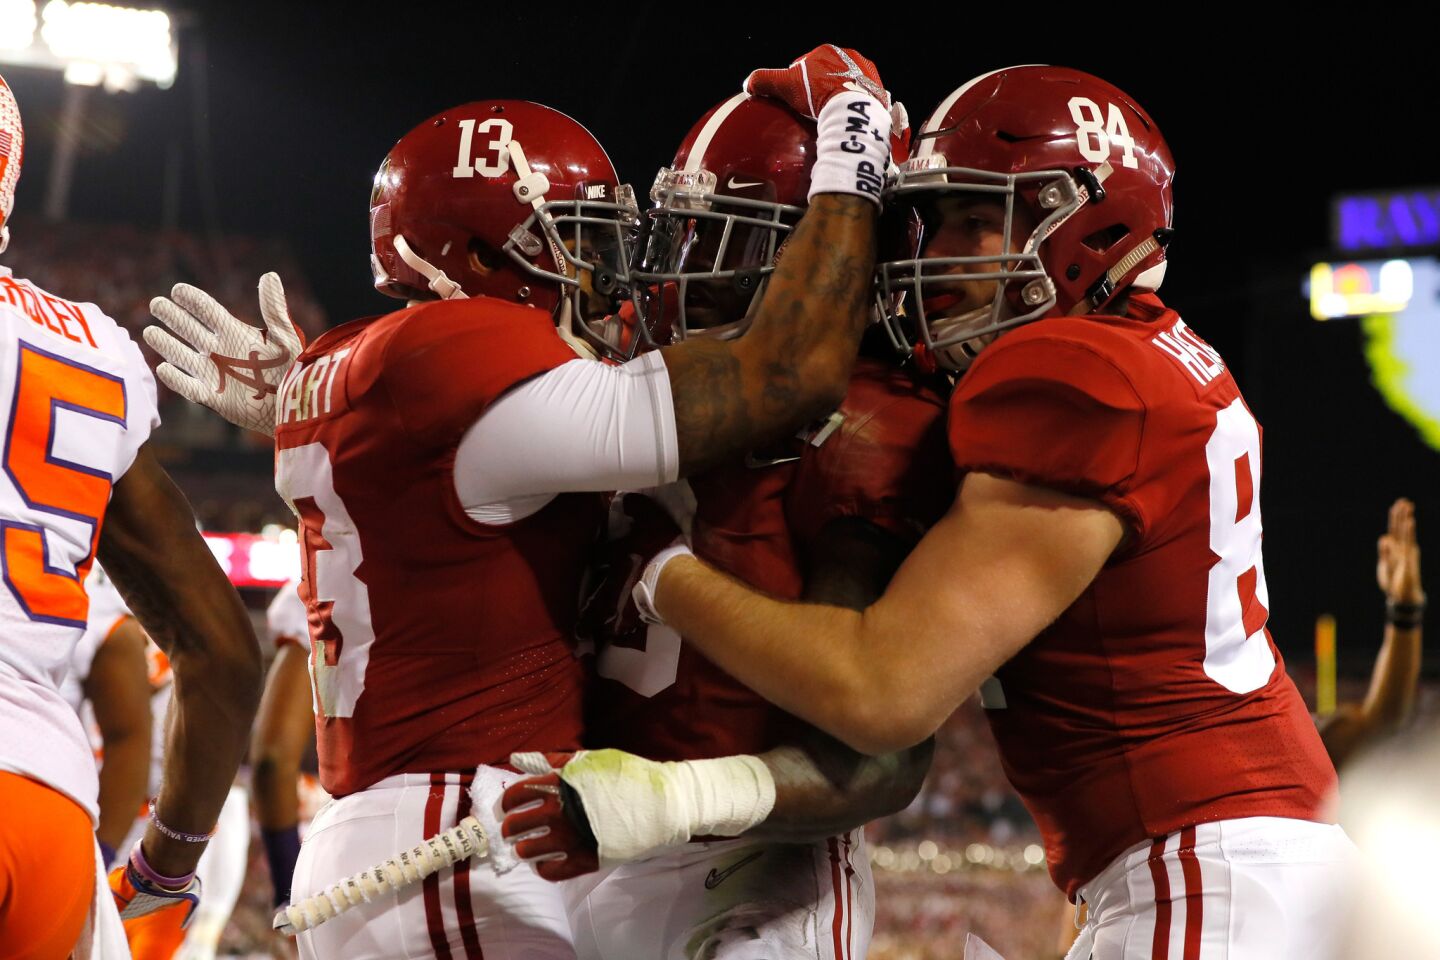 Alabama running back Bo Scarbrough is congratulated by teammates ArDarius Stewart (13) and Hale Hentges (84) after scoring on a 25-yard run during the first quarter Monday.